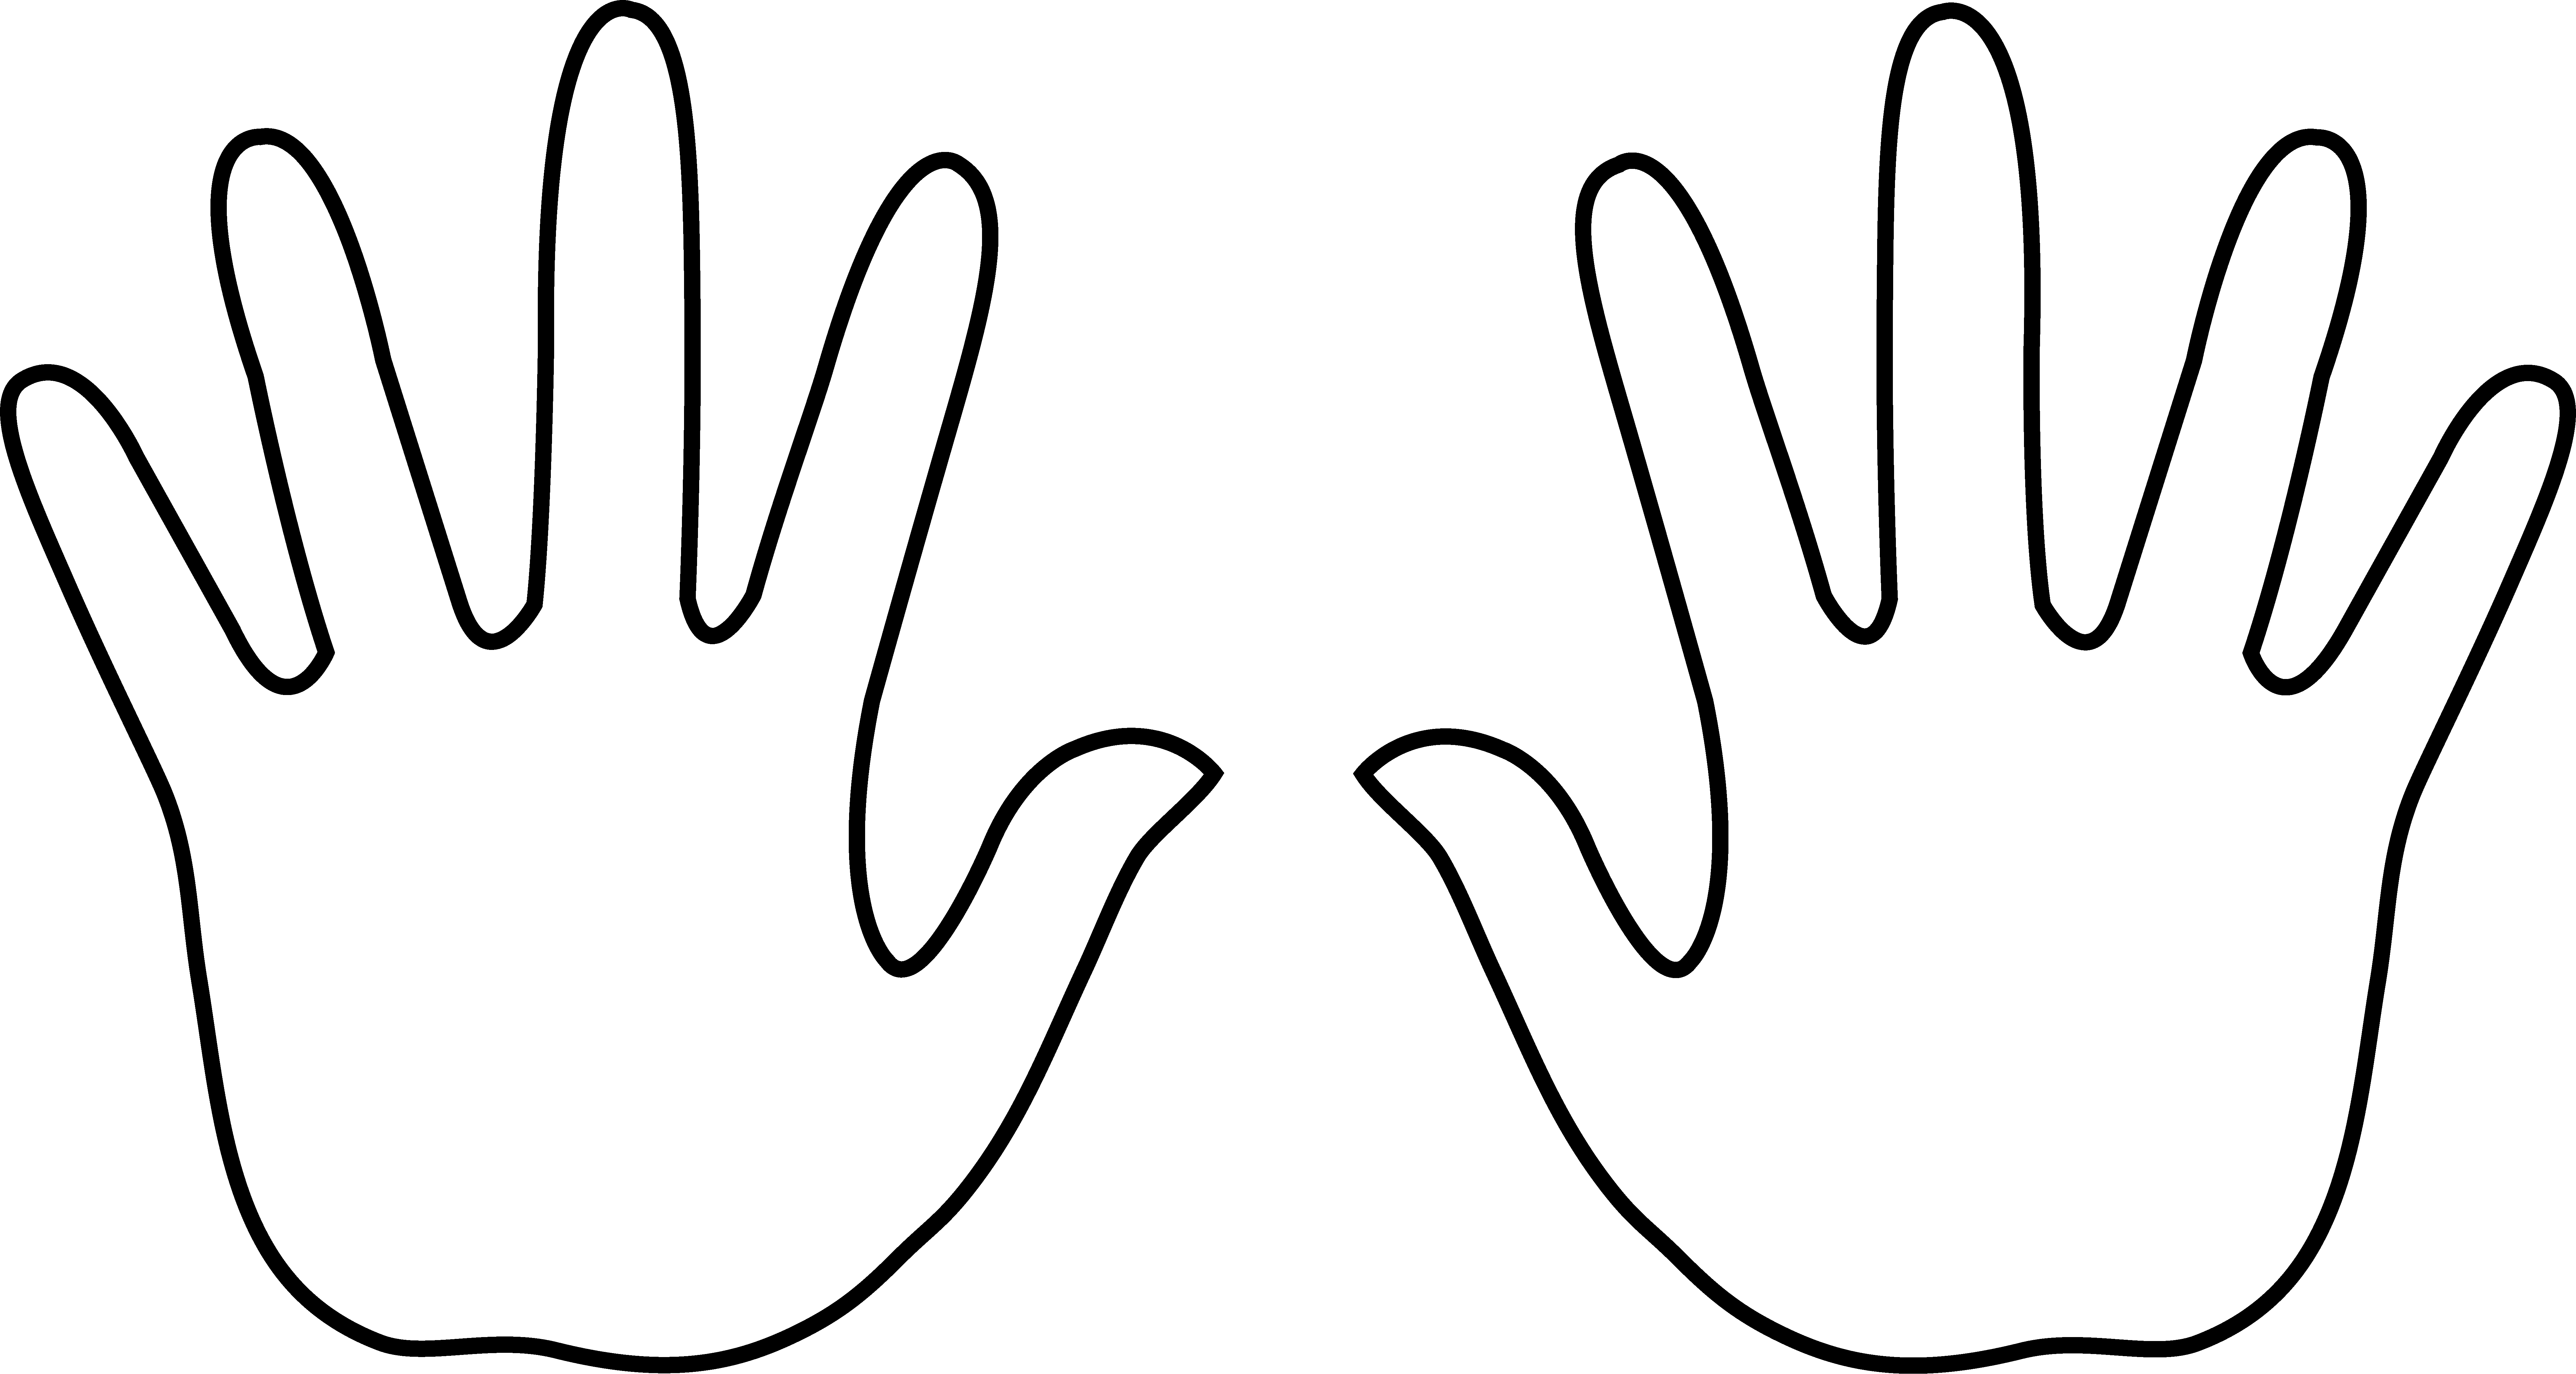 Free Printable Hands, Download Free Printable Hands png images, Free